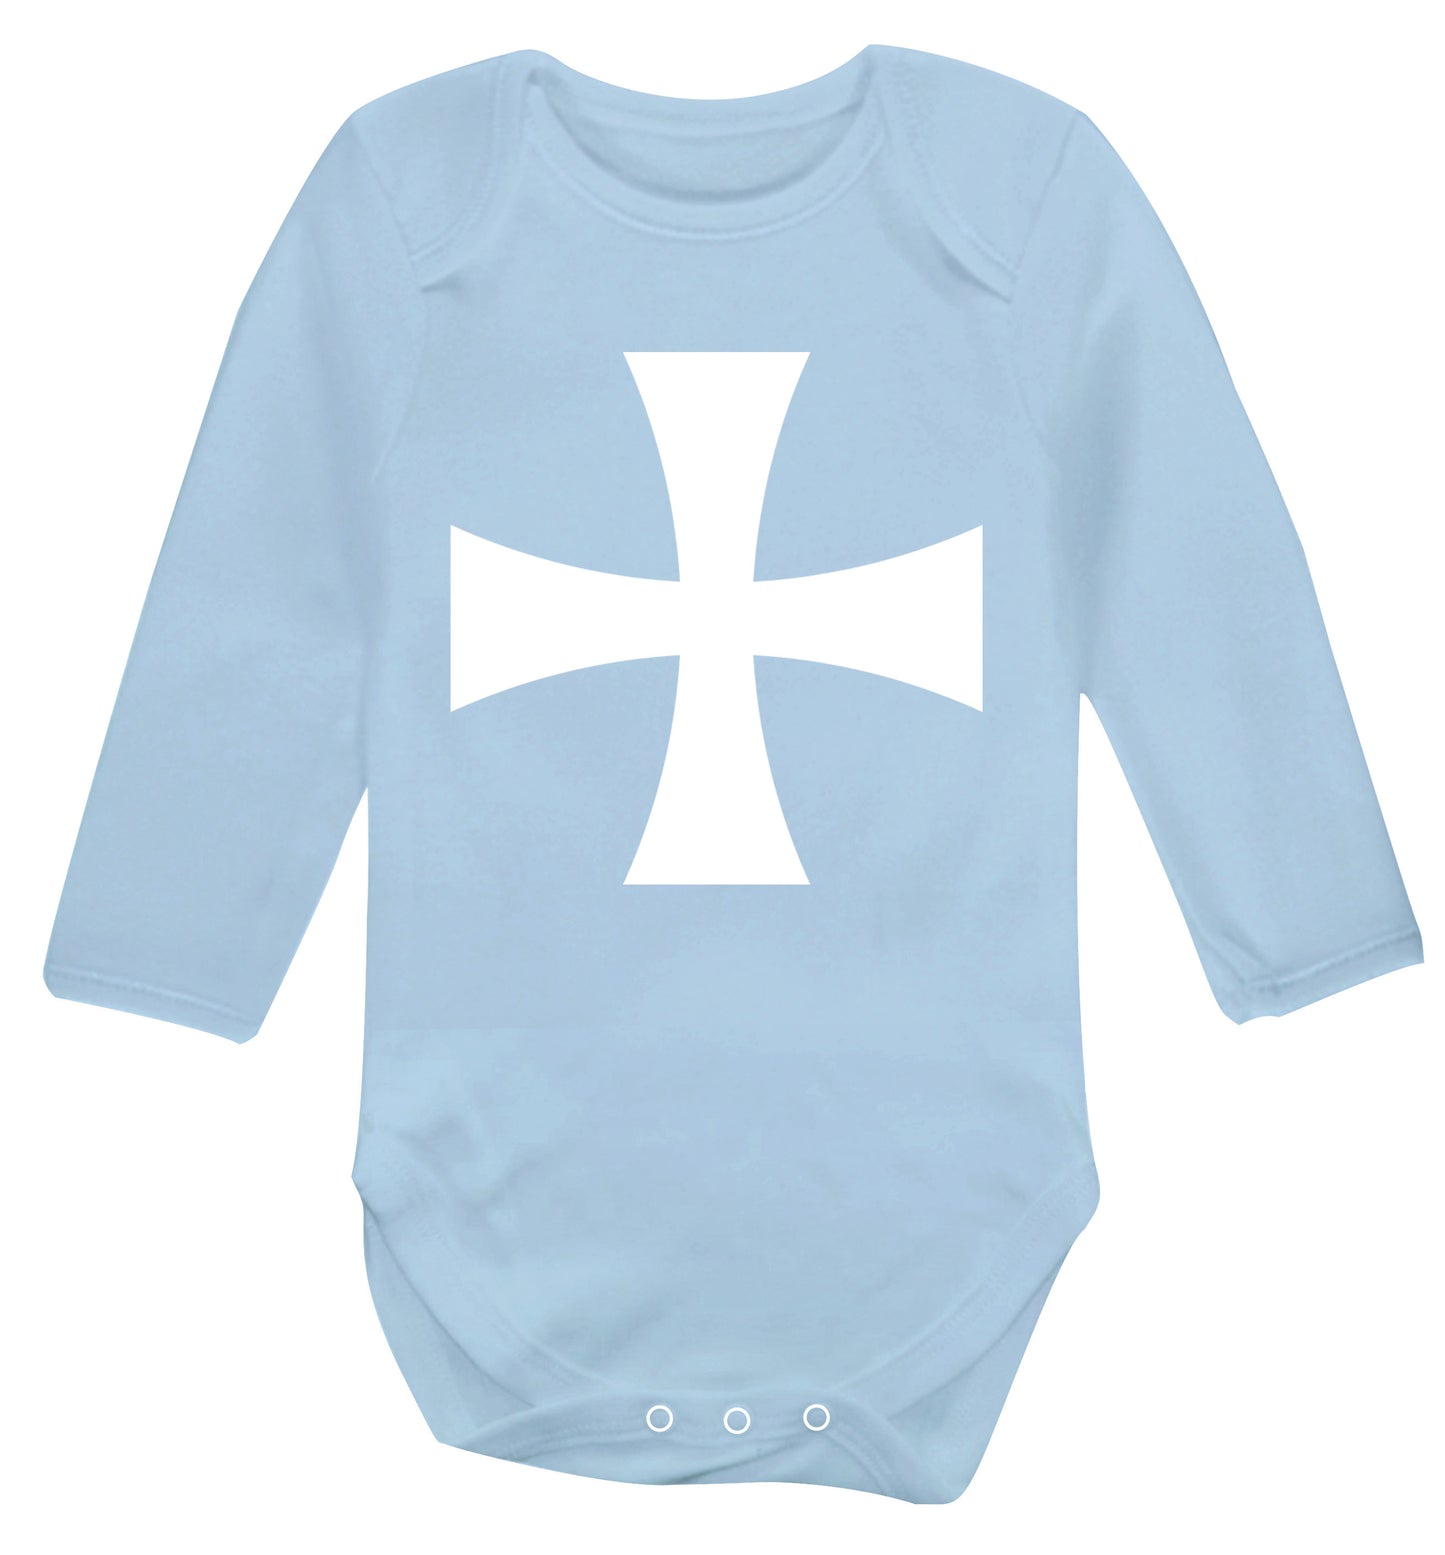 Knights Templar cross Baby Vest long sleeved pale blue 6-12 months